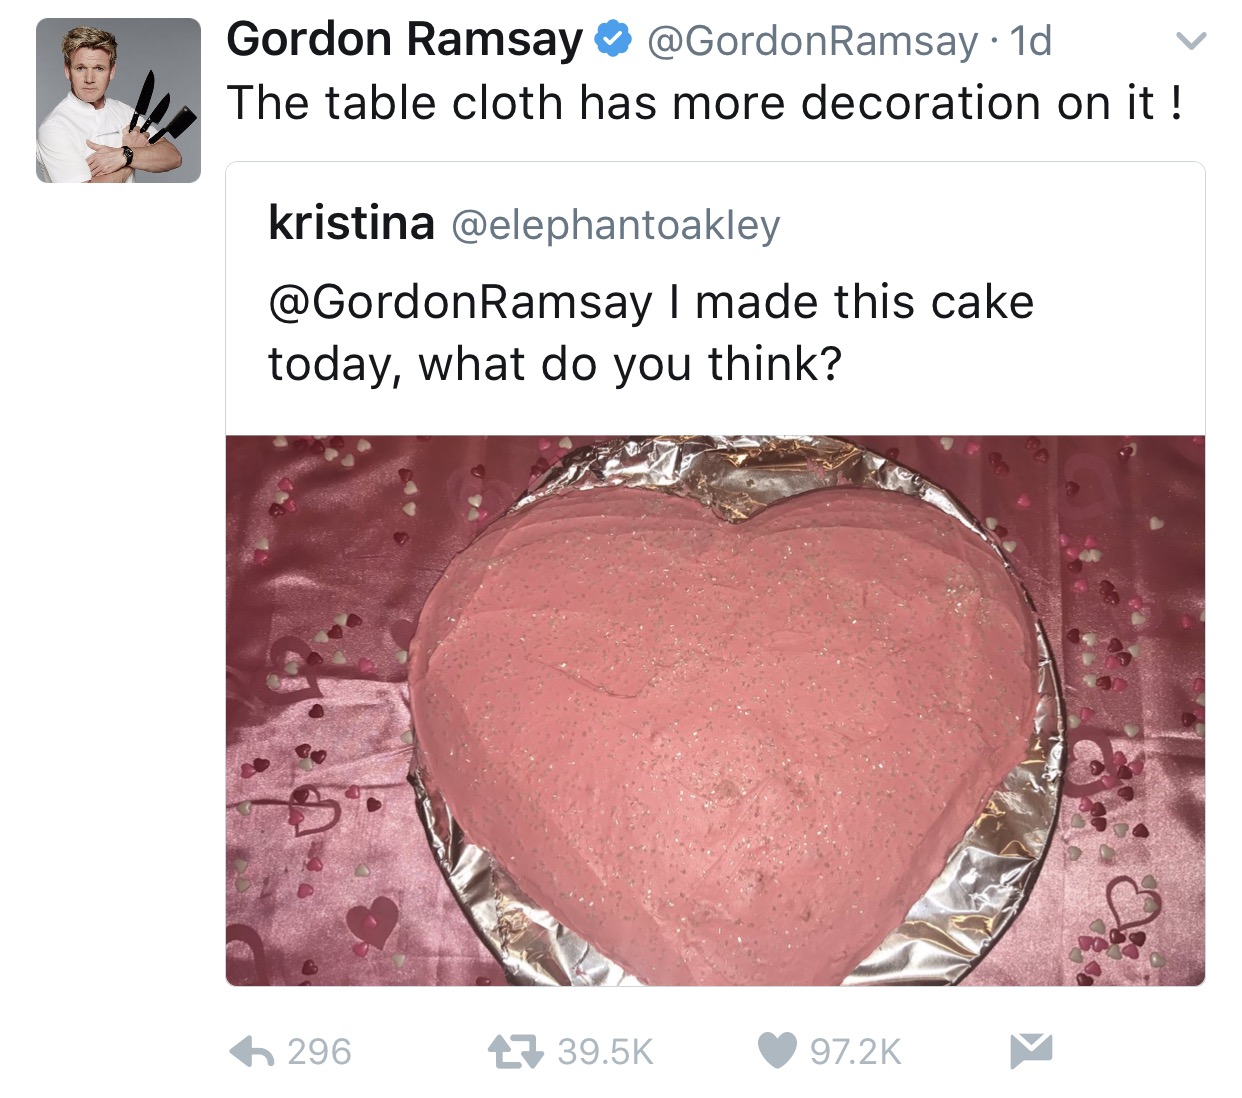 tweet - love - Gordon Ramsay Ramsay 1d The table cloth has more decoration on it! kristina Ramsay I made this cake today, what do you think? 6 296 27 V